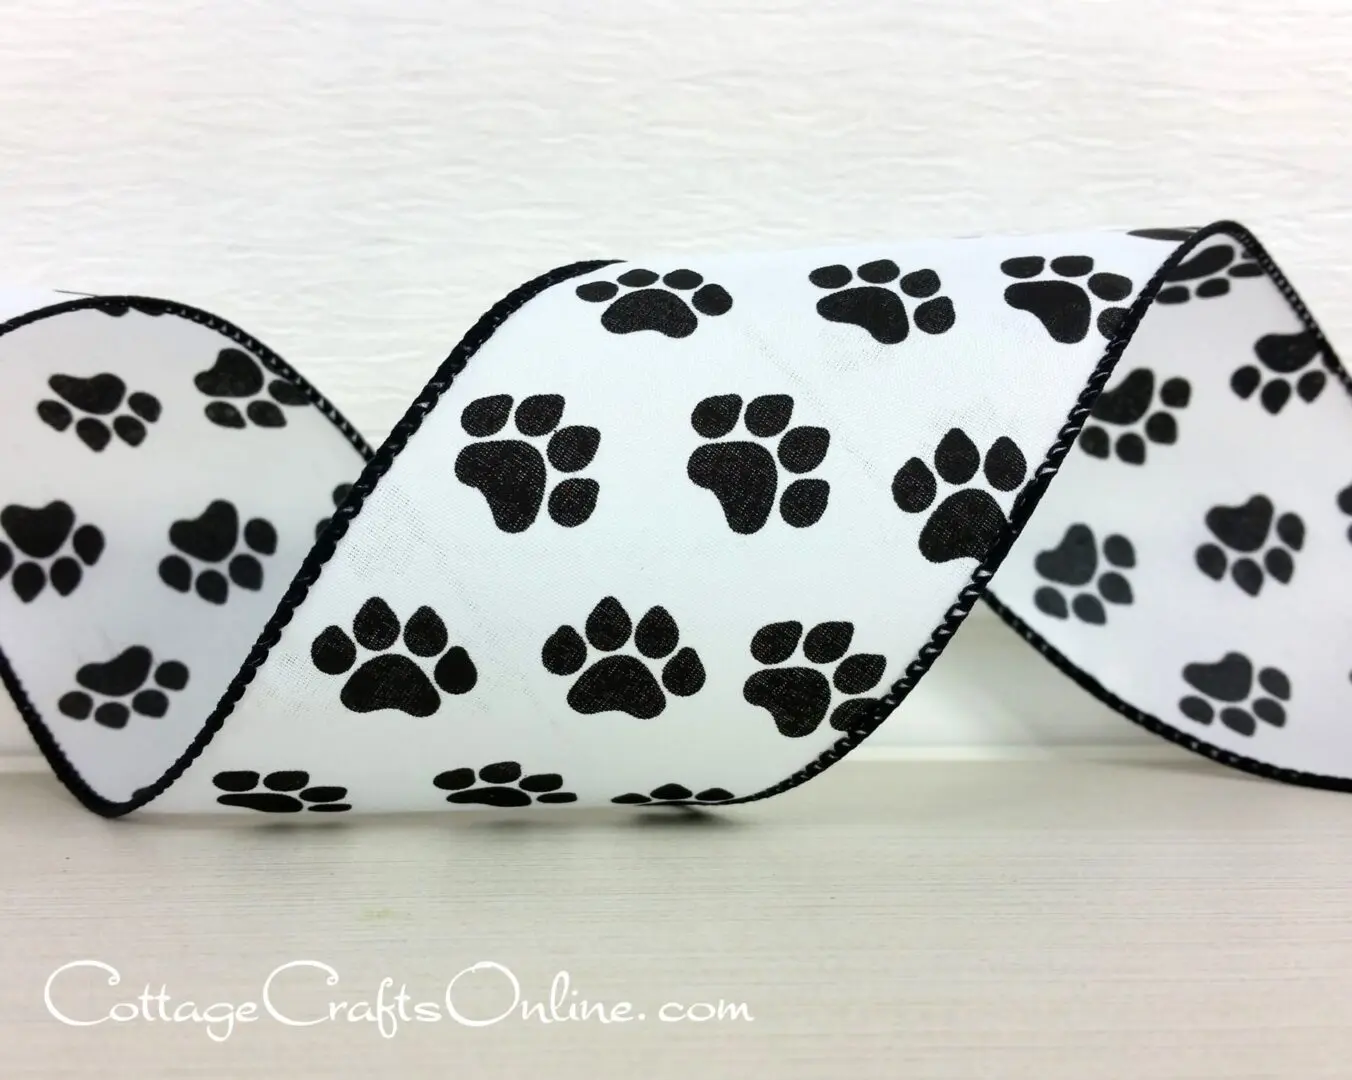 A black and white ribbon with paw prints on it